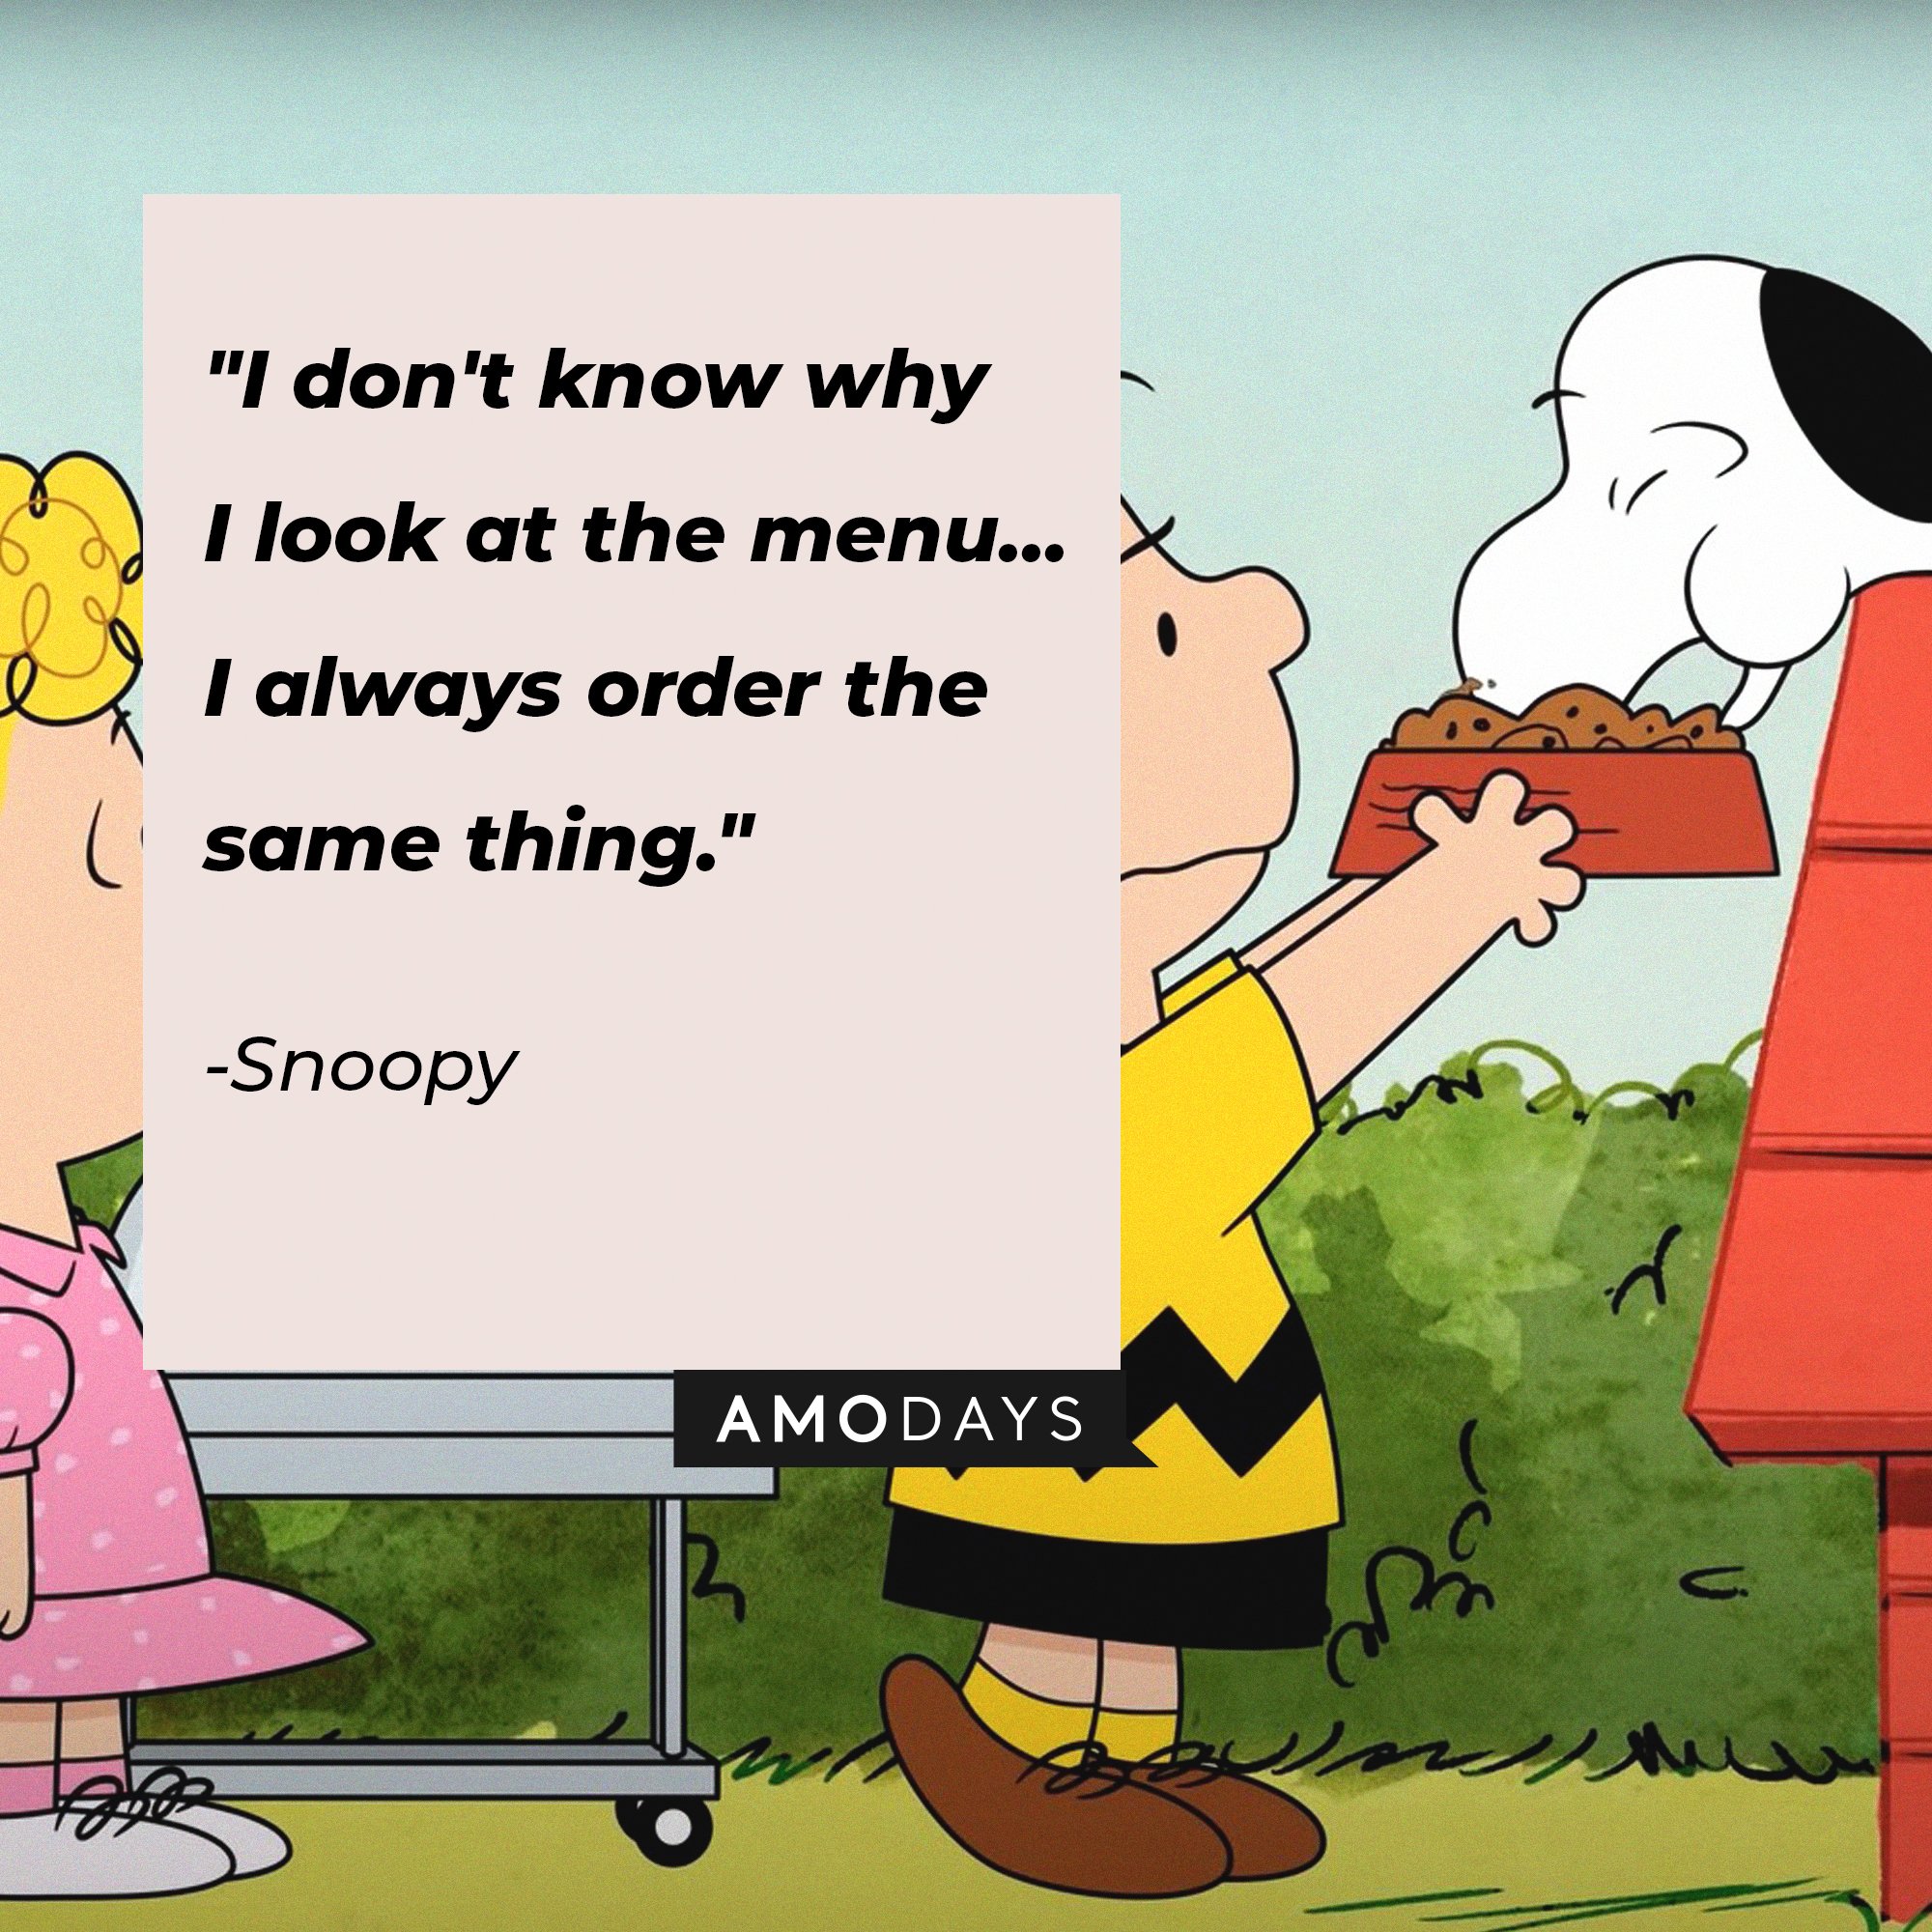 Snoopy’s quote: "I don't know why I look at the menu… I always order the same thing." | Image: AmoDays 